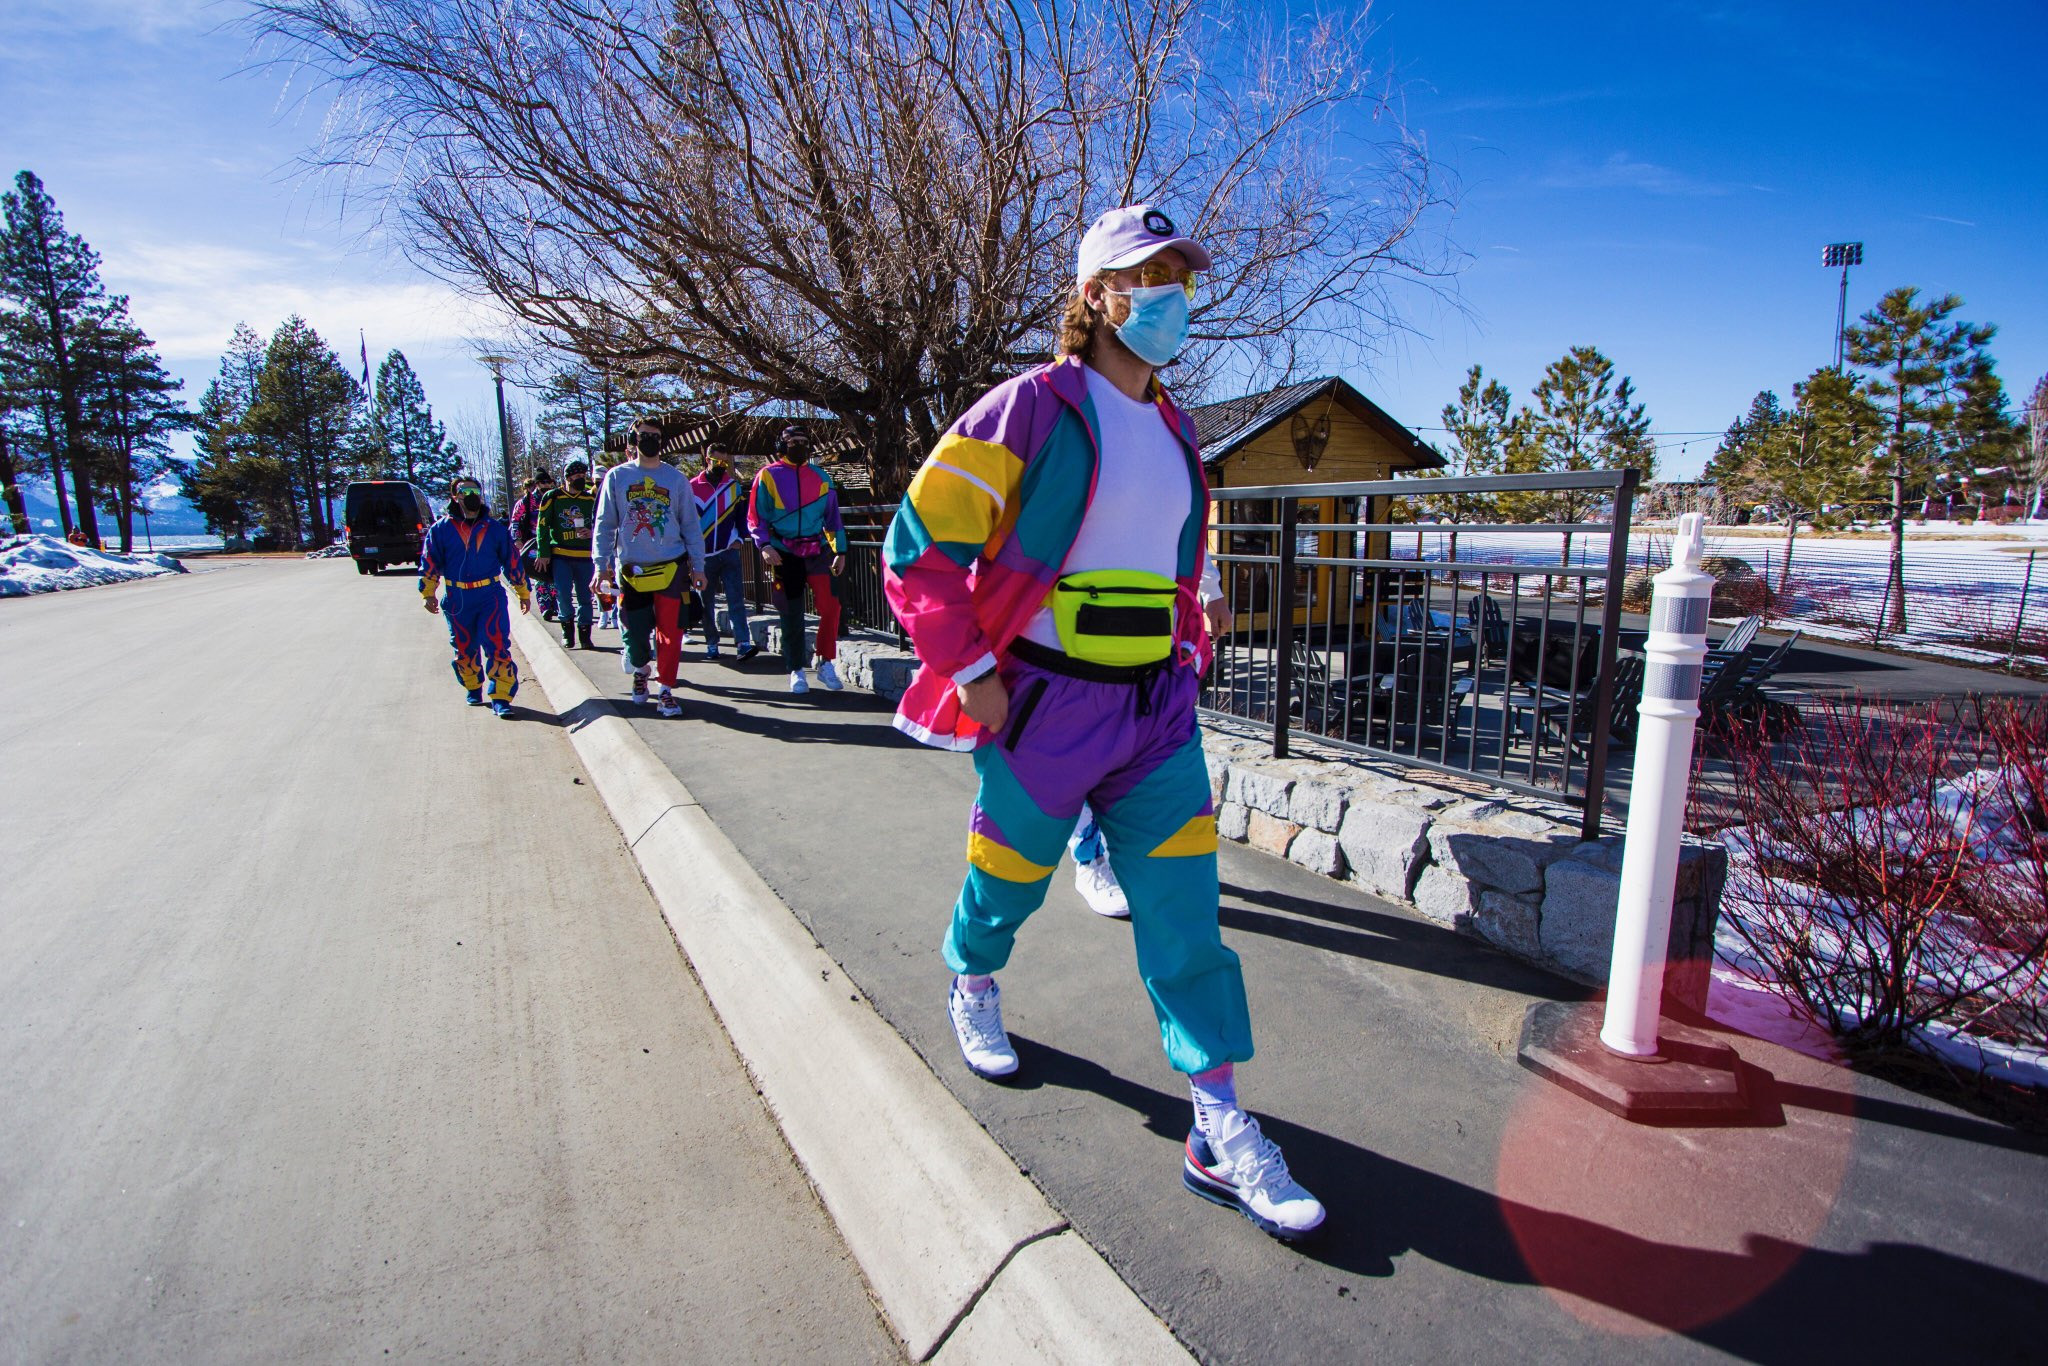 Flashing neon ski fashion from the '90s, the Bruins arrived in style for  their outdoor game at Lake Tahoe - The Boston Globe